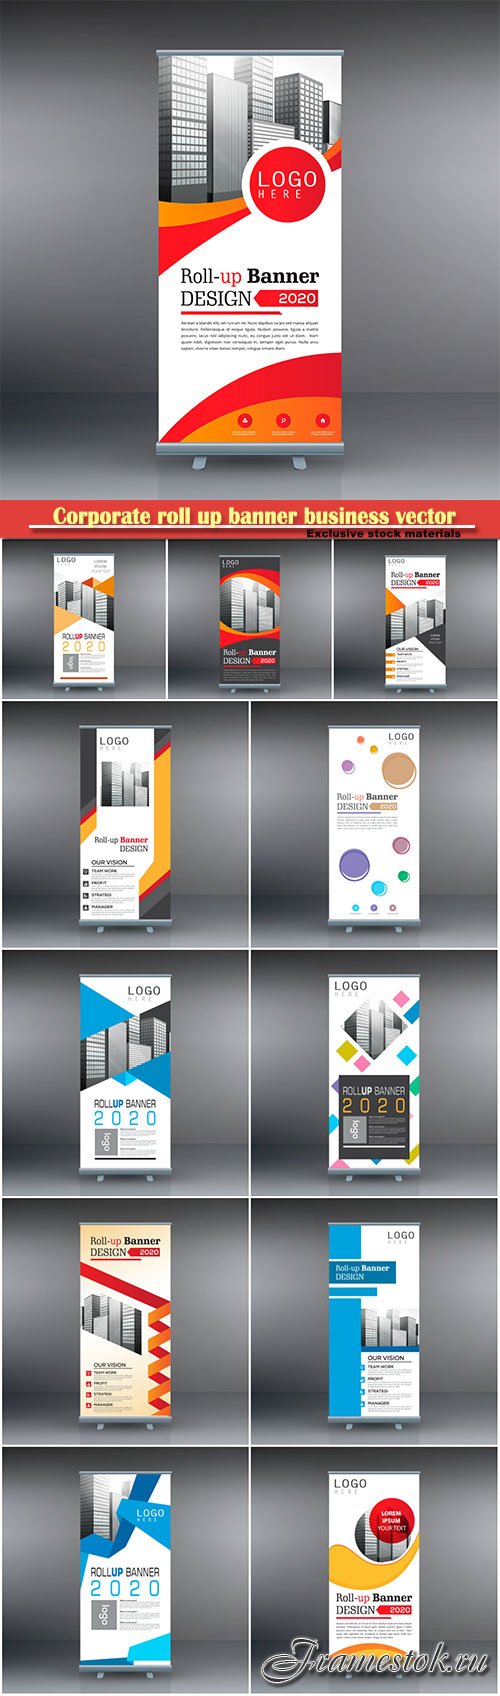 Corporate roll up banner business vector template # 2